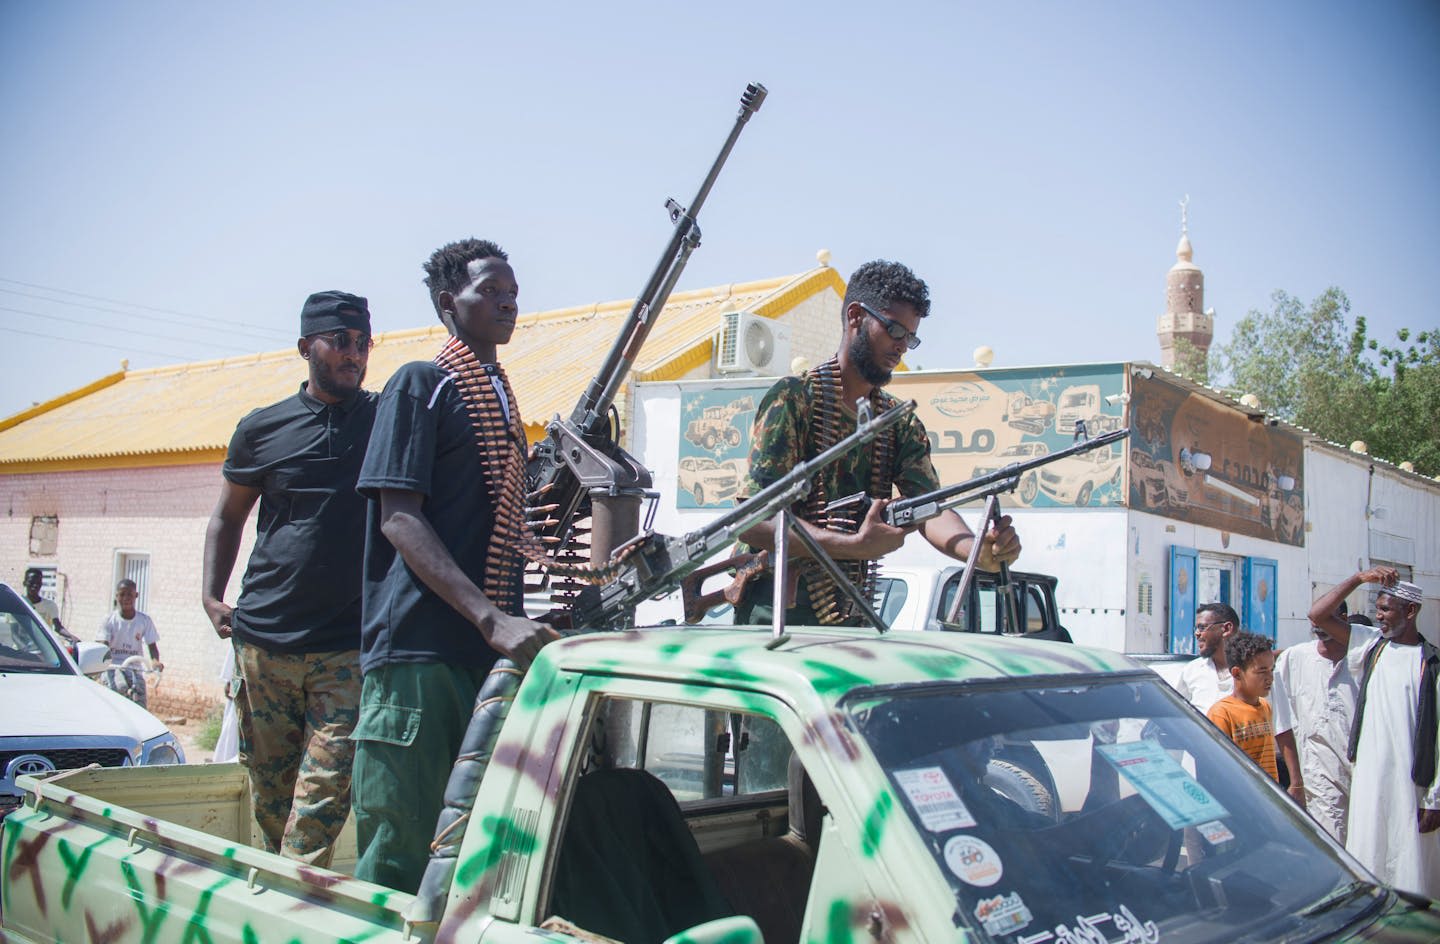 Iran’s intervention in Sudan’s civil war advances its geopolitical goals − but not without risks